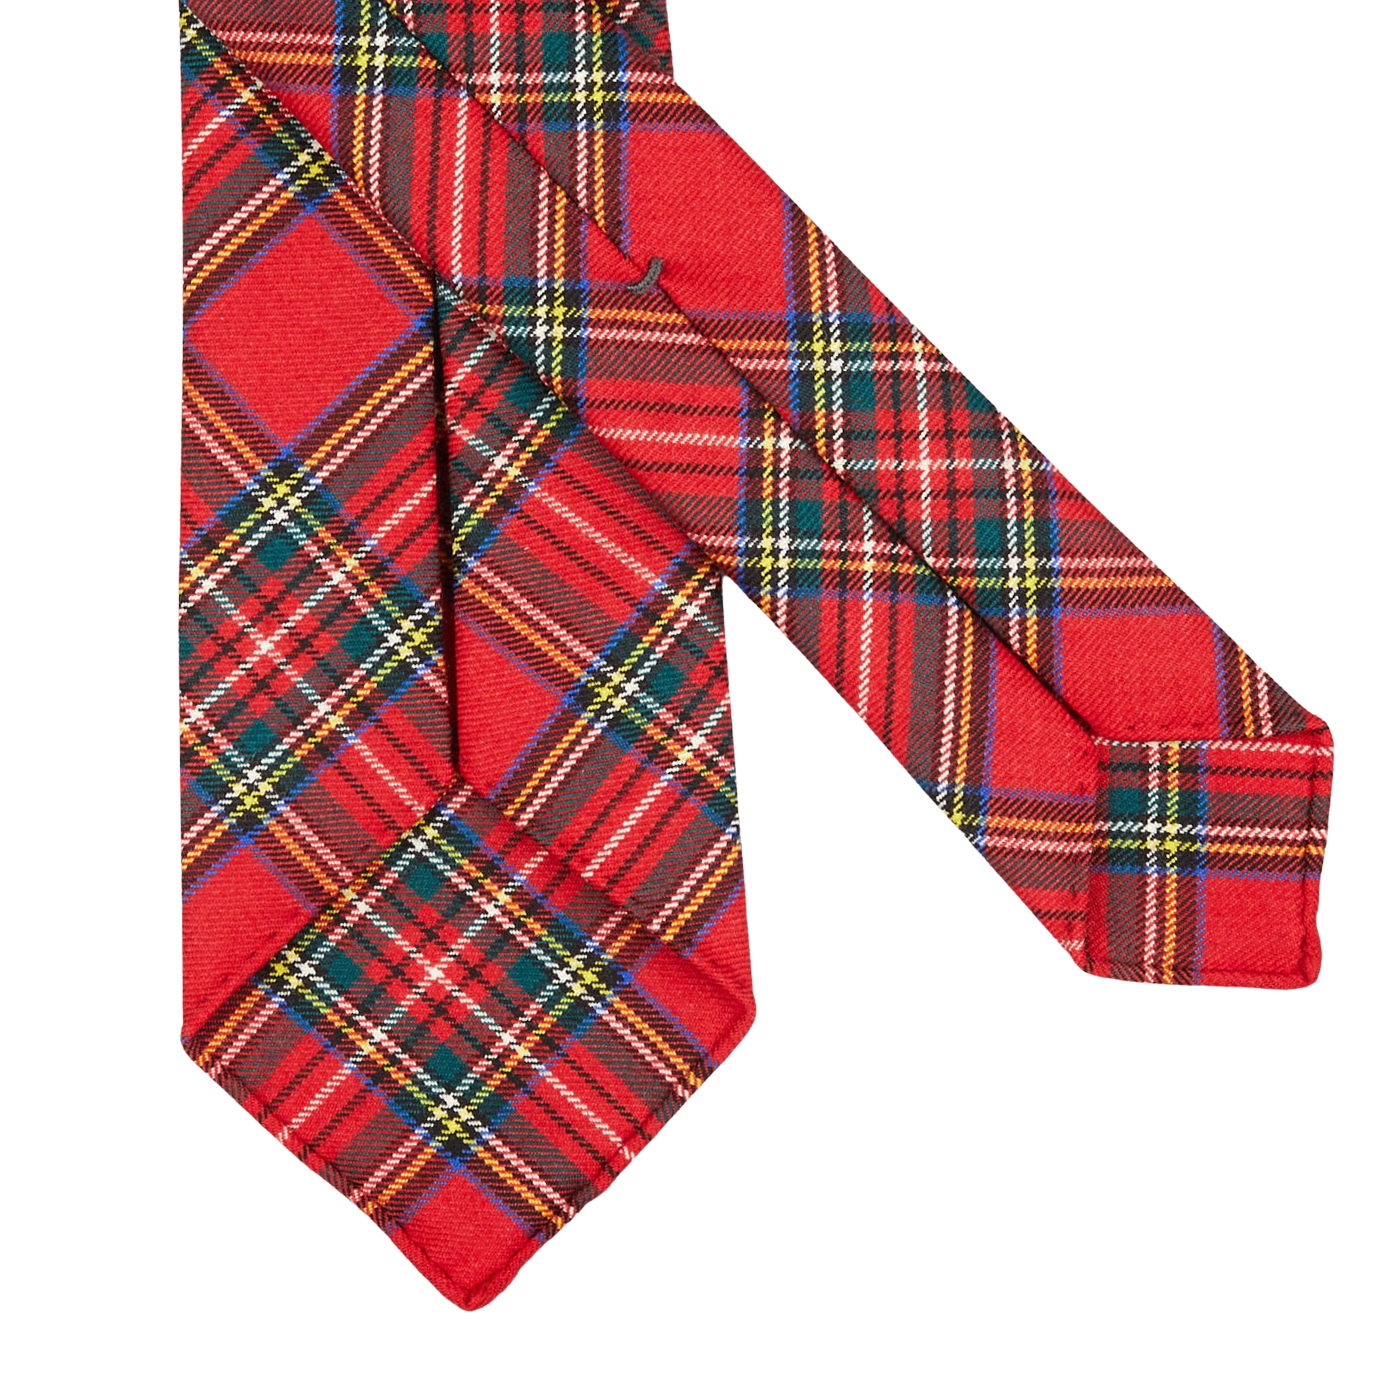 A handmade Red Royal Stewart Tartan 7-Fold Wool Tie by Dreaming Of Monday on a white surface.